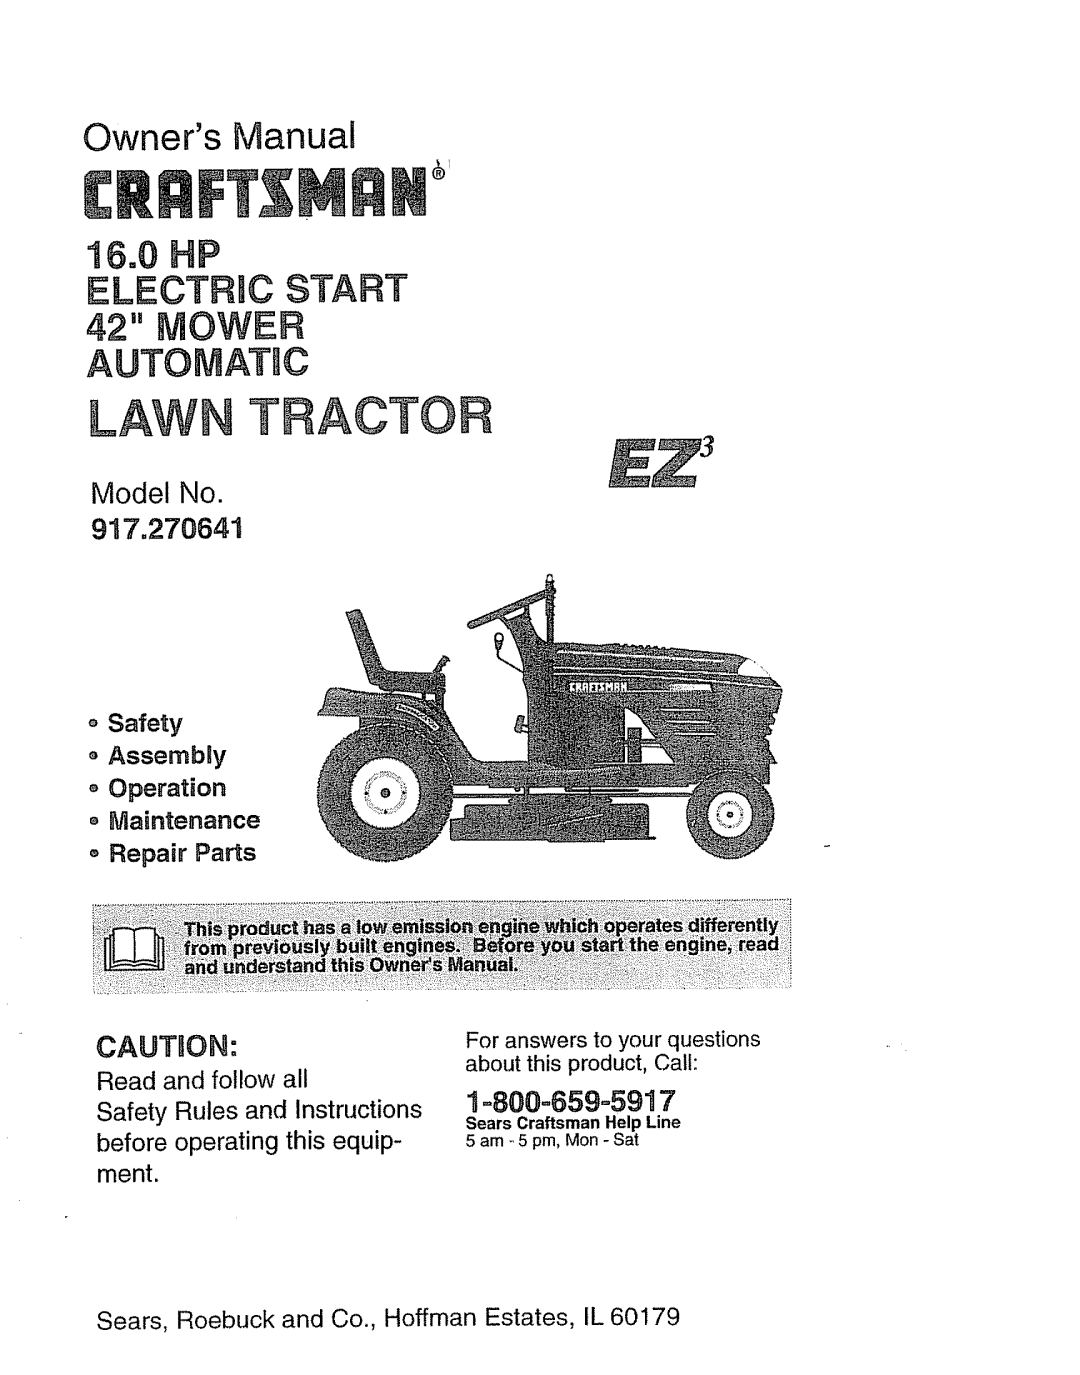 Craftsman 917270841 owner manual Lawn Traoto, Model No, Cautbon, 1800=859=5917, Safety Assembly, Read and follow all 